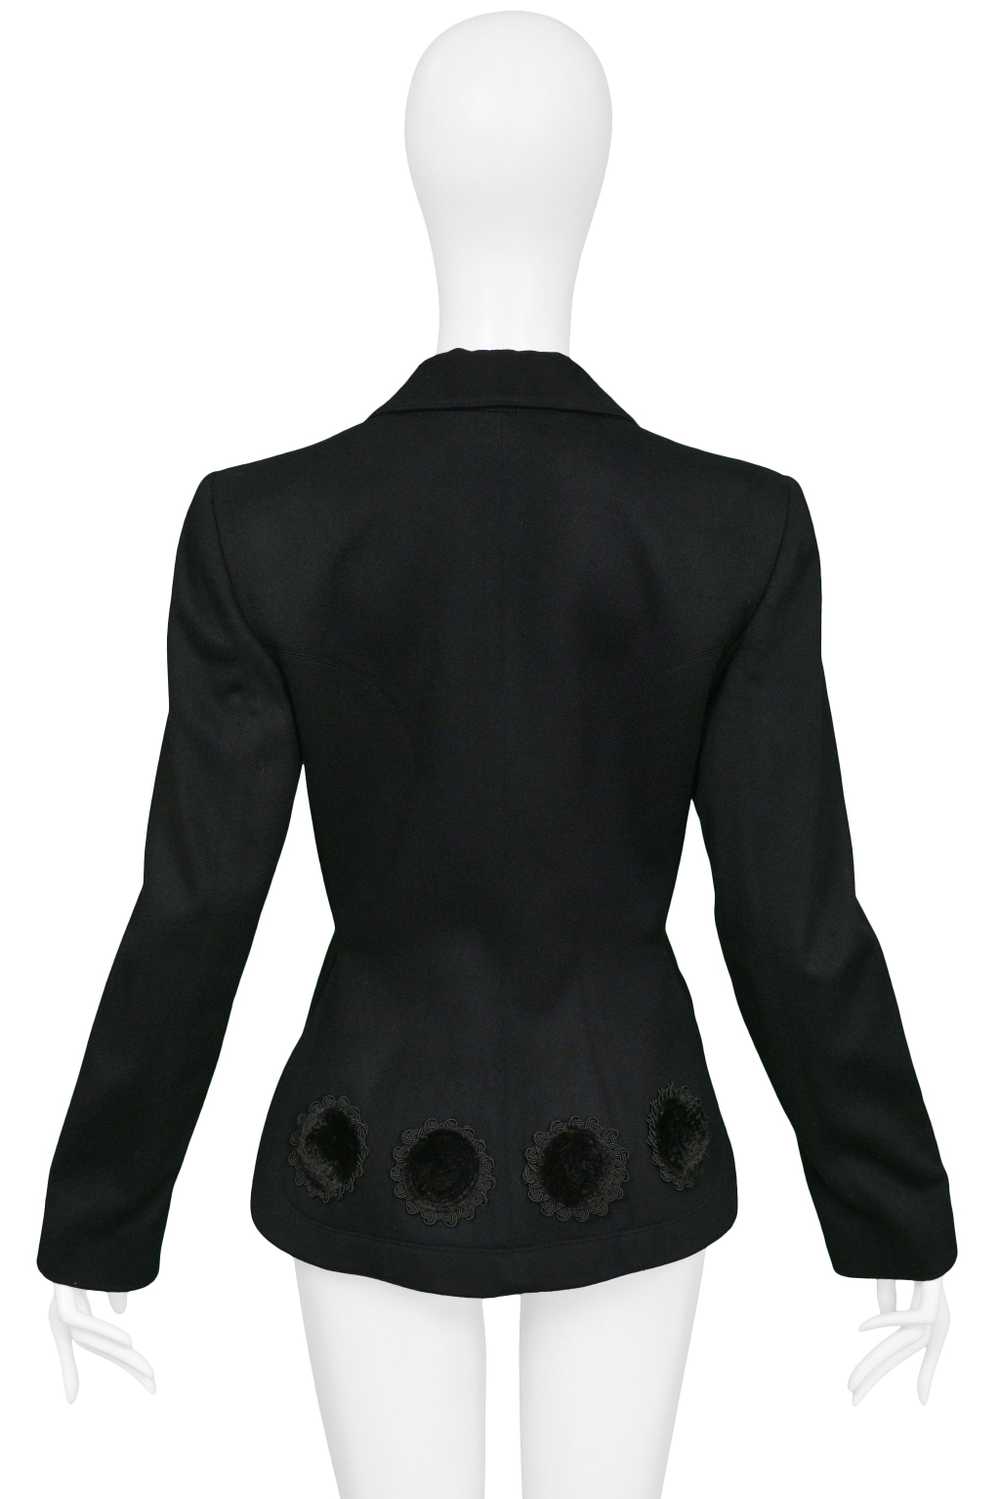 ALAIA BLACK FITTED BLAZER WITH VELVET APPLIQUE 19… - image 6